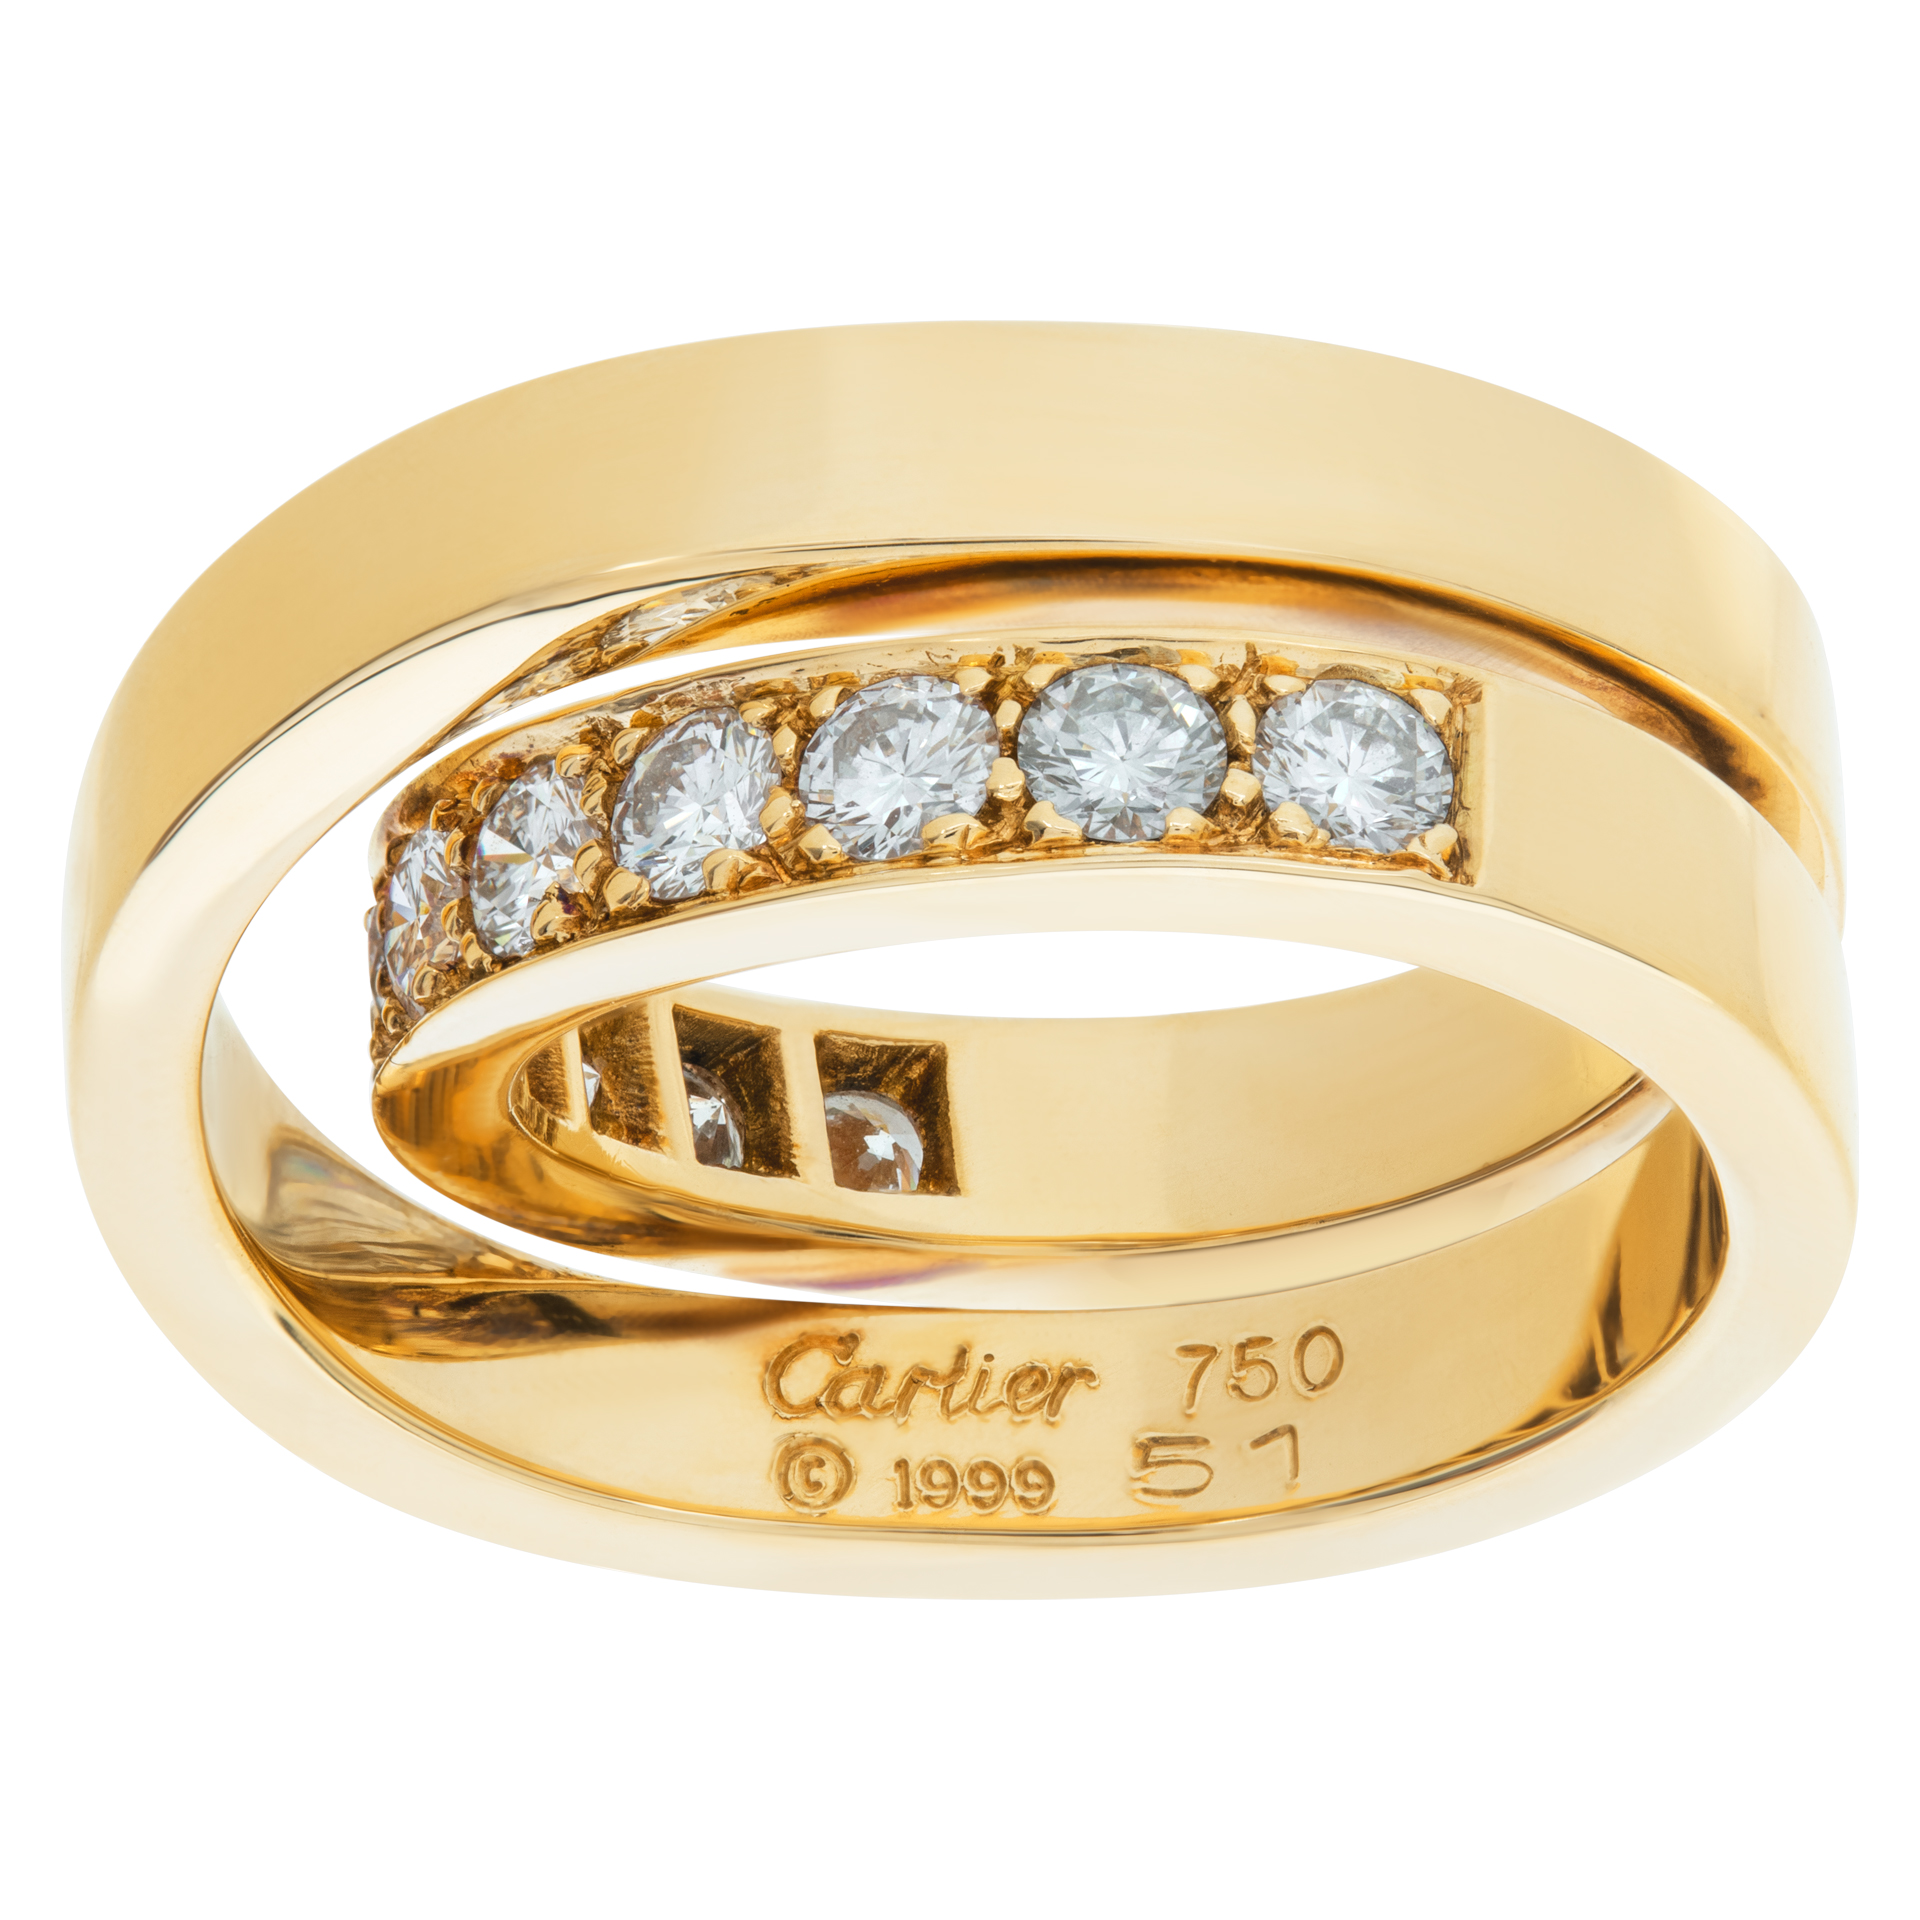 Cartier Nouvelle Vague Crossover diamond ring in 18k. 1.10 carats in diamonds